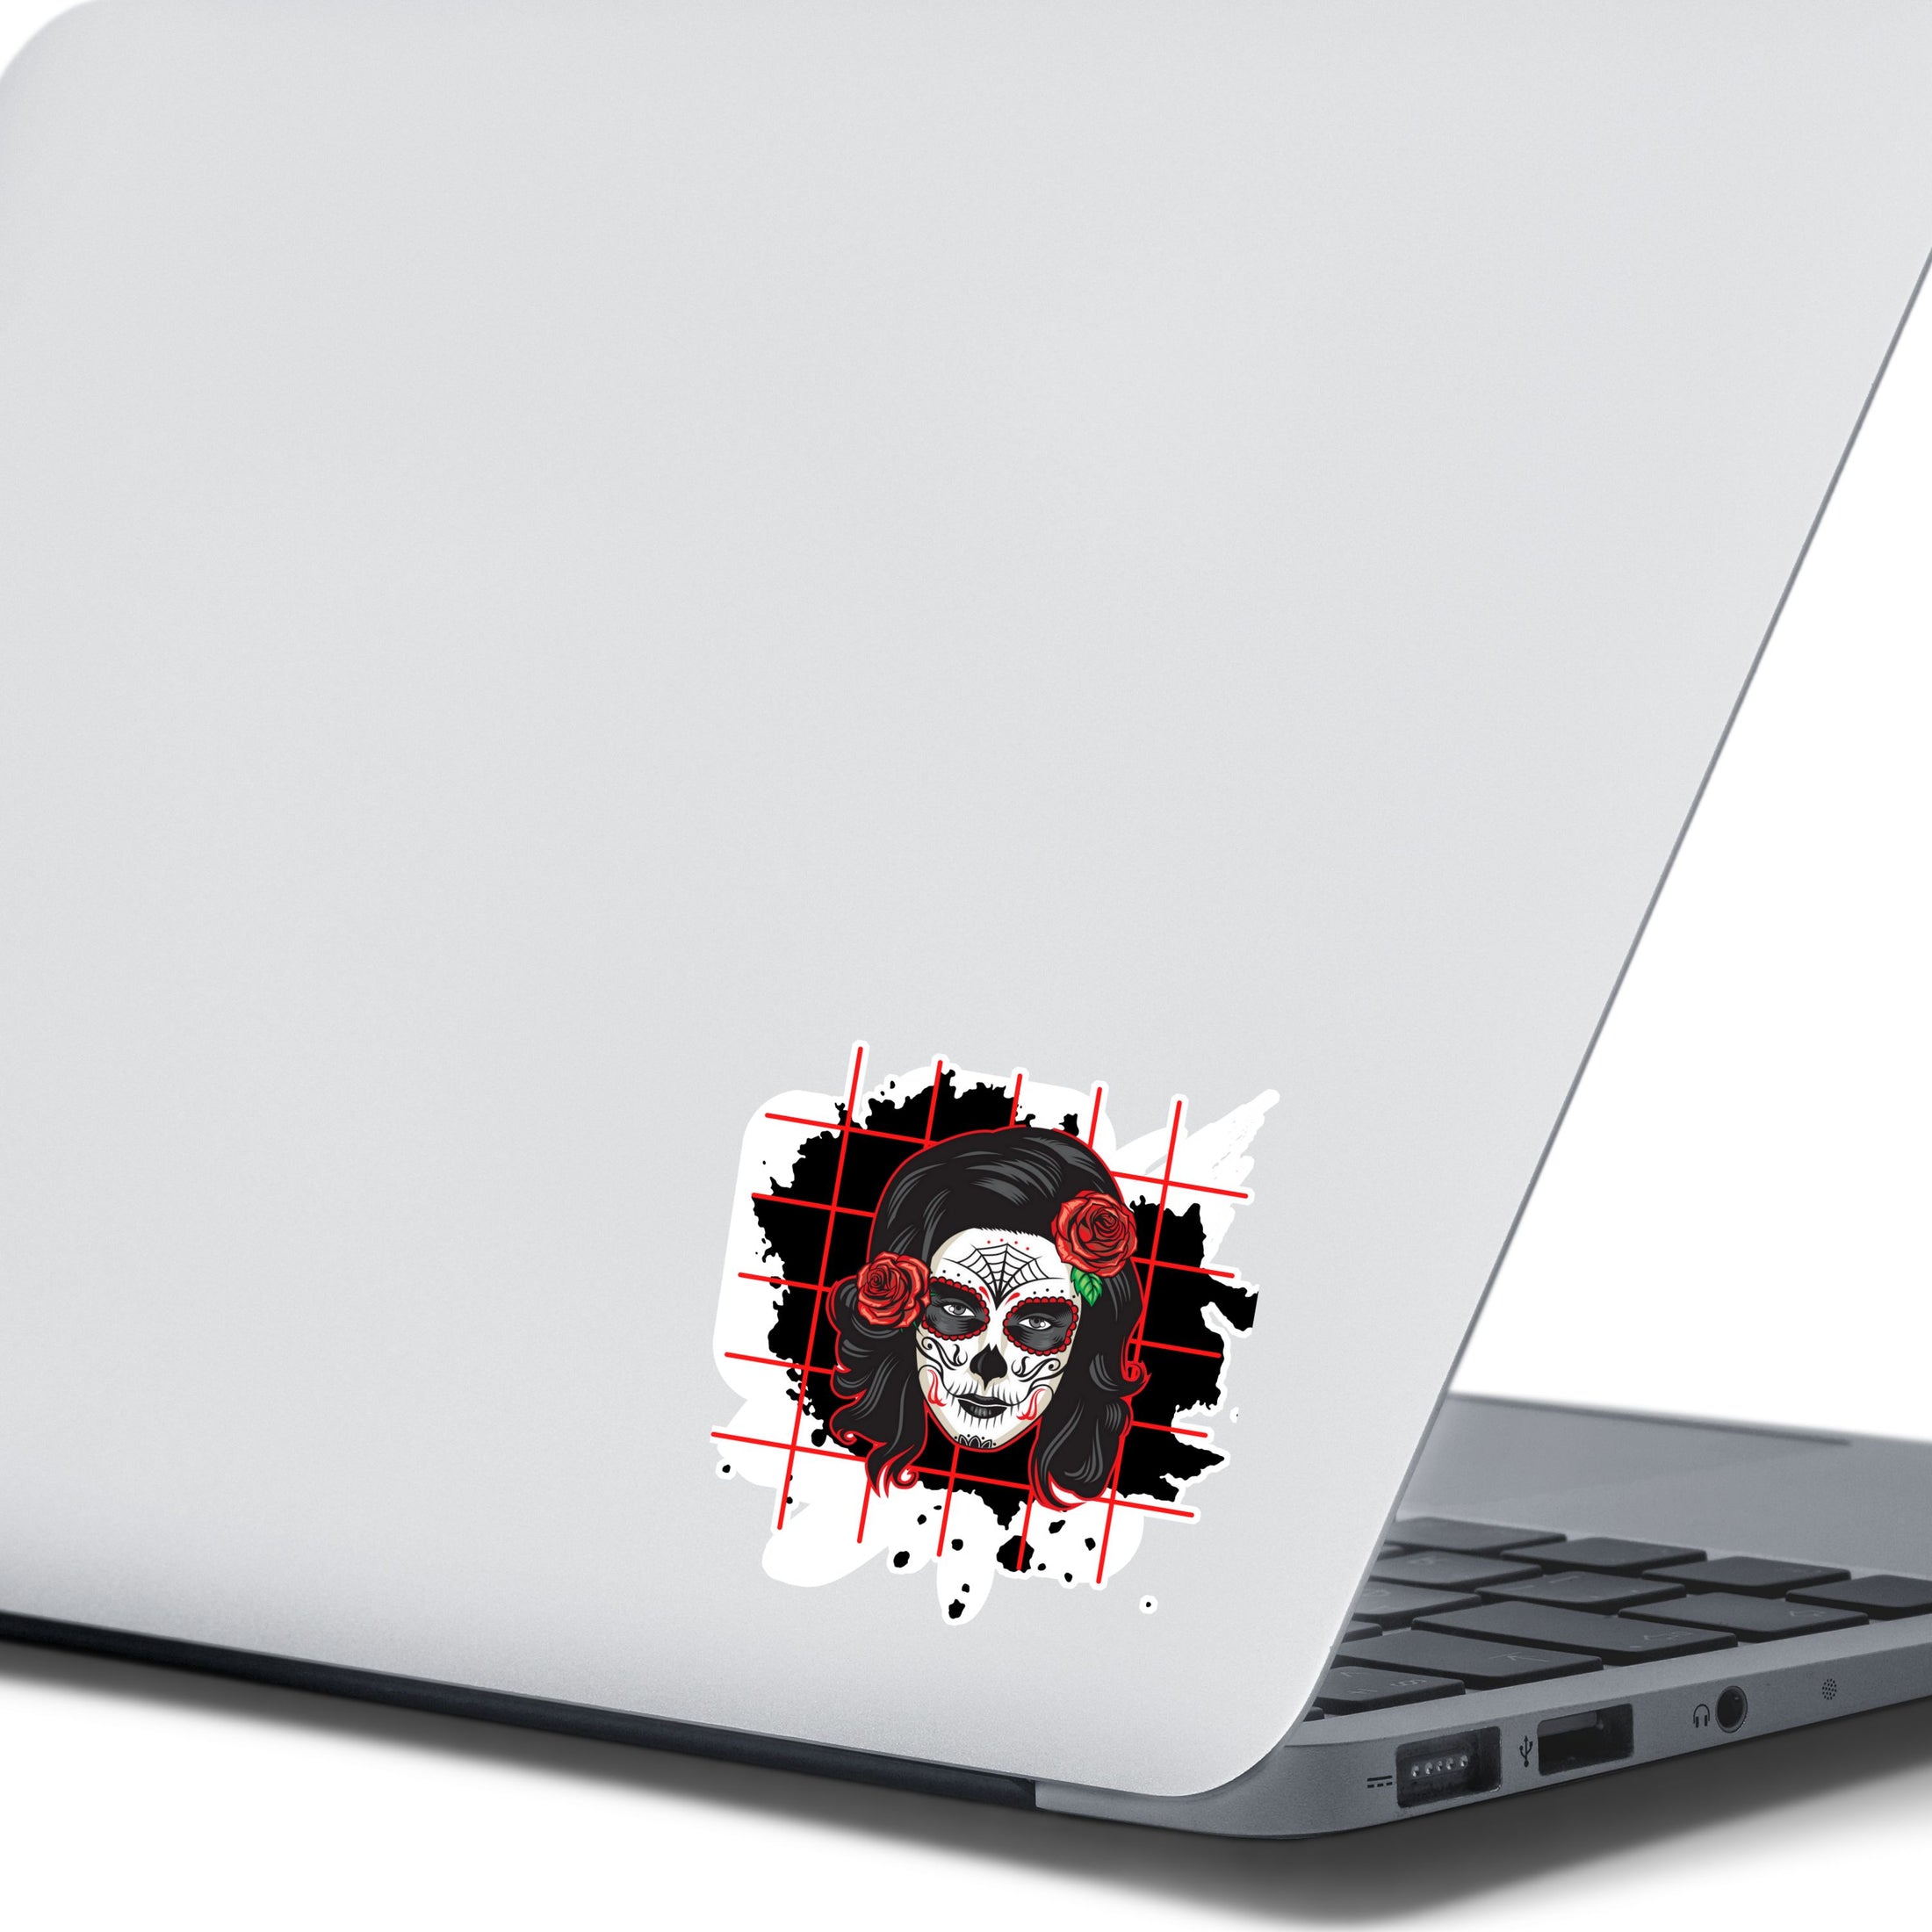 Trash Polka uses red, black, and white with a combination of abstract, surrealistic, and realistic images, and this individual die-cut sticker features a sugar skull woman with roses in her hair on a black background with a red grid. This image shows the trash polka sugar skull sticker on the back of an open laptop.